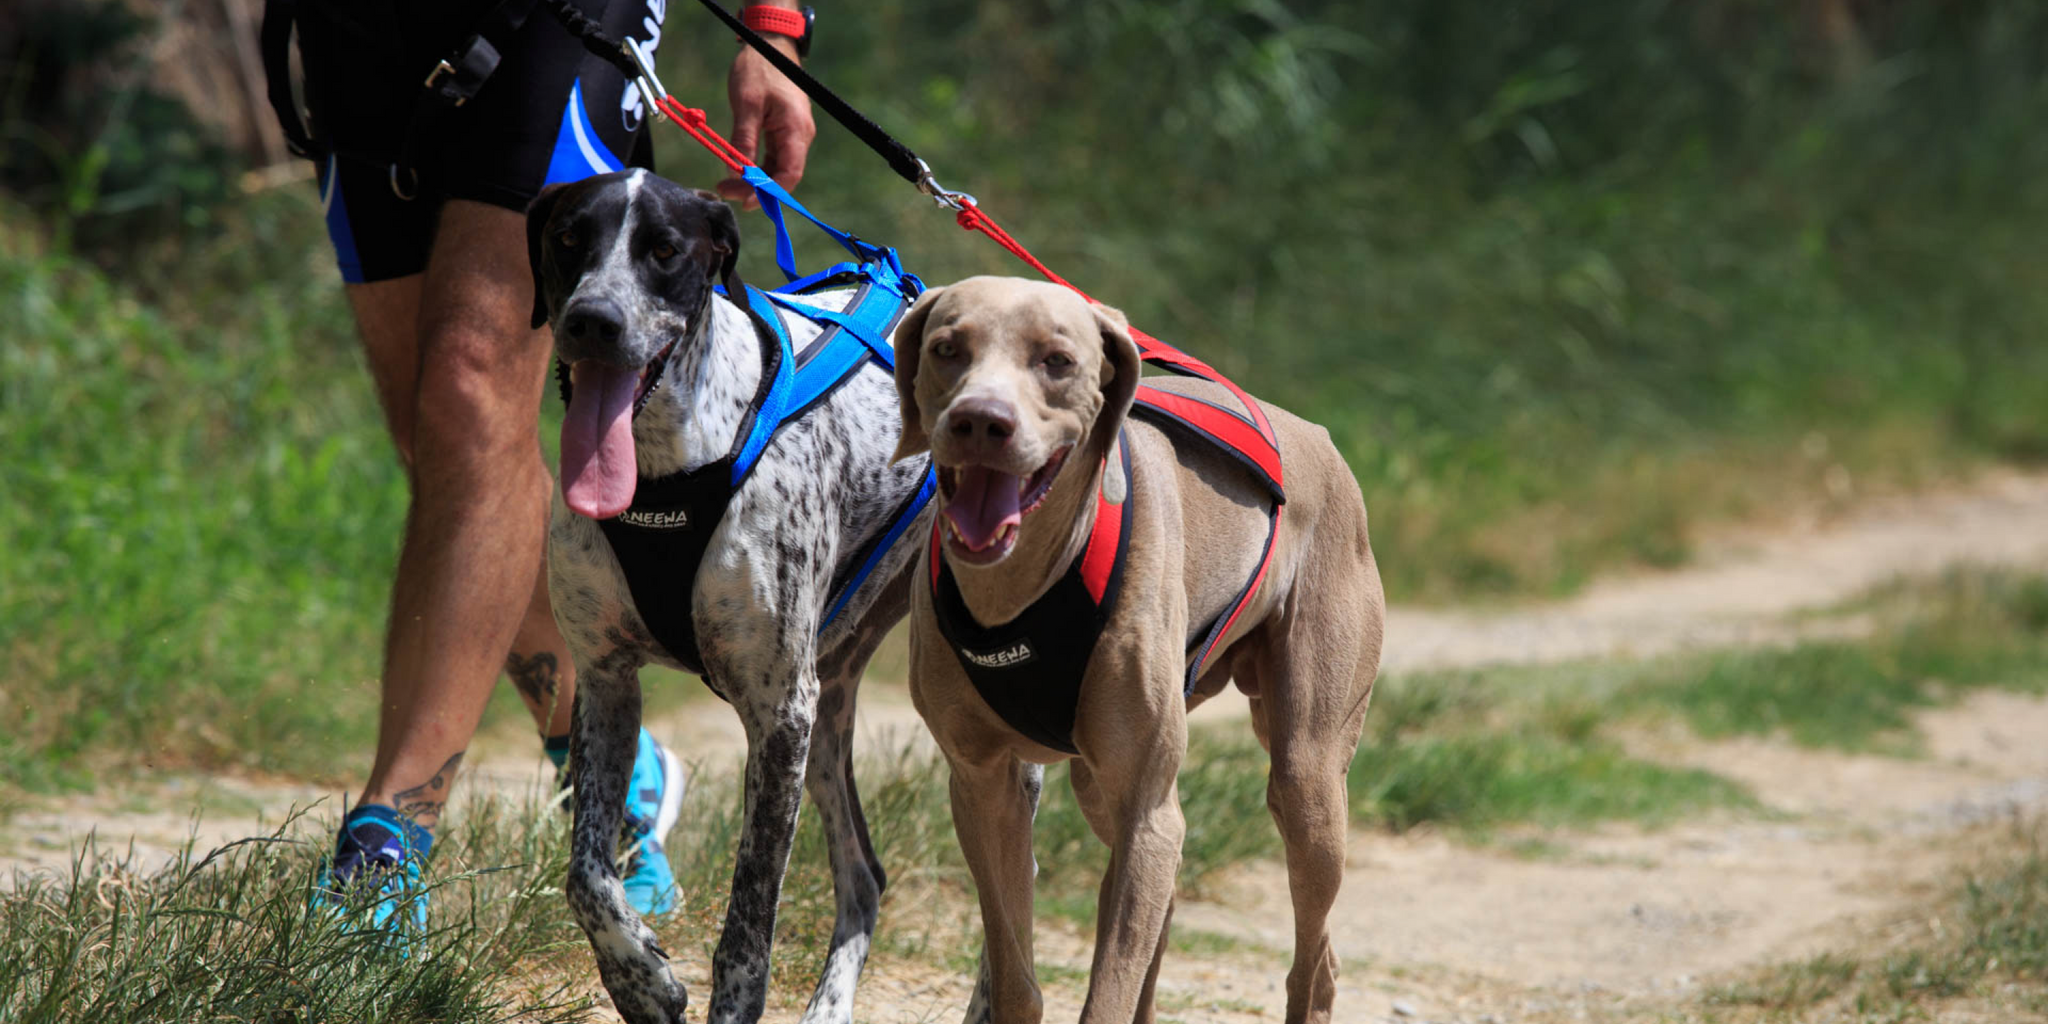 Small Dog Harness vs Large Dog Harness: What’s the difference?